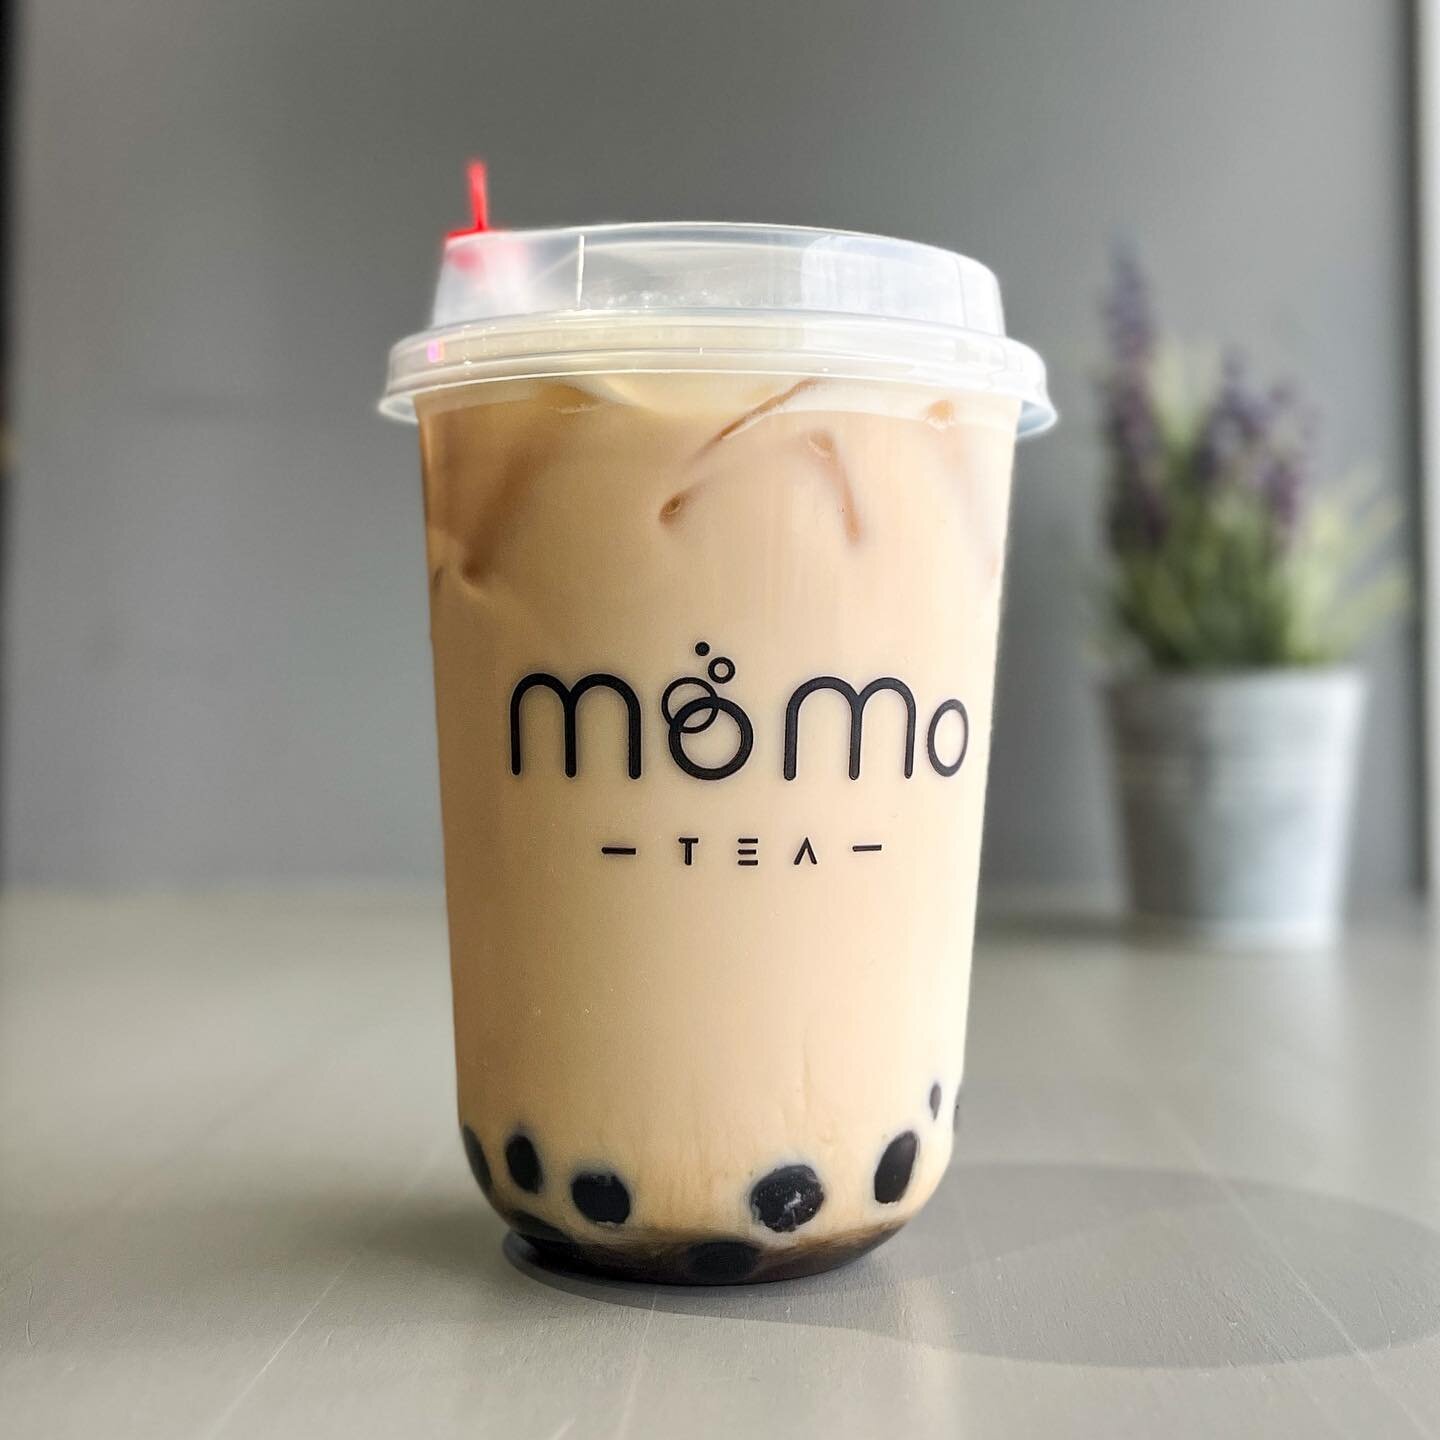 Black milk tea w/ boba 🖤🧋We are open at normal hours this weekend for Mothers Day so come see us!

🕑 Open 11-7PM daily; we are closed on Tuesday&rsquo;s
&bull;
&bull;
&bull;
&bull;
#momotea #momoteabr #batonrougefoodies #blackmilktea #batonrougete